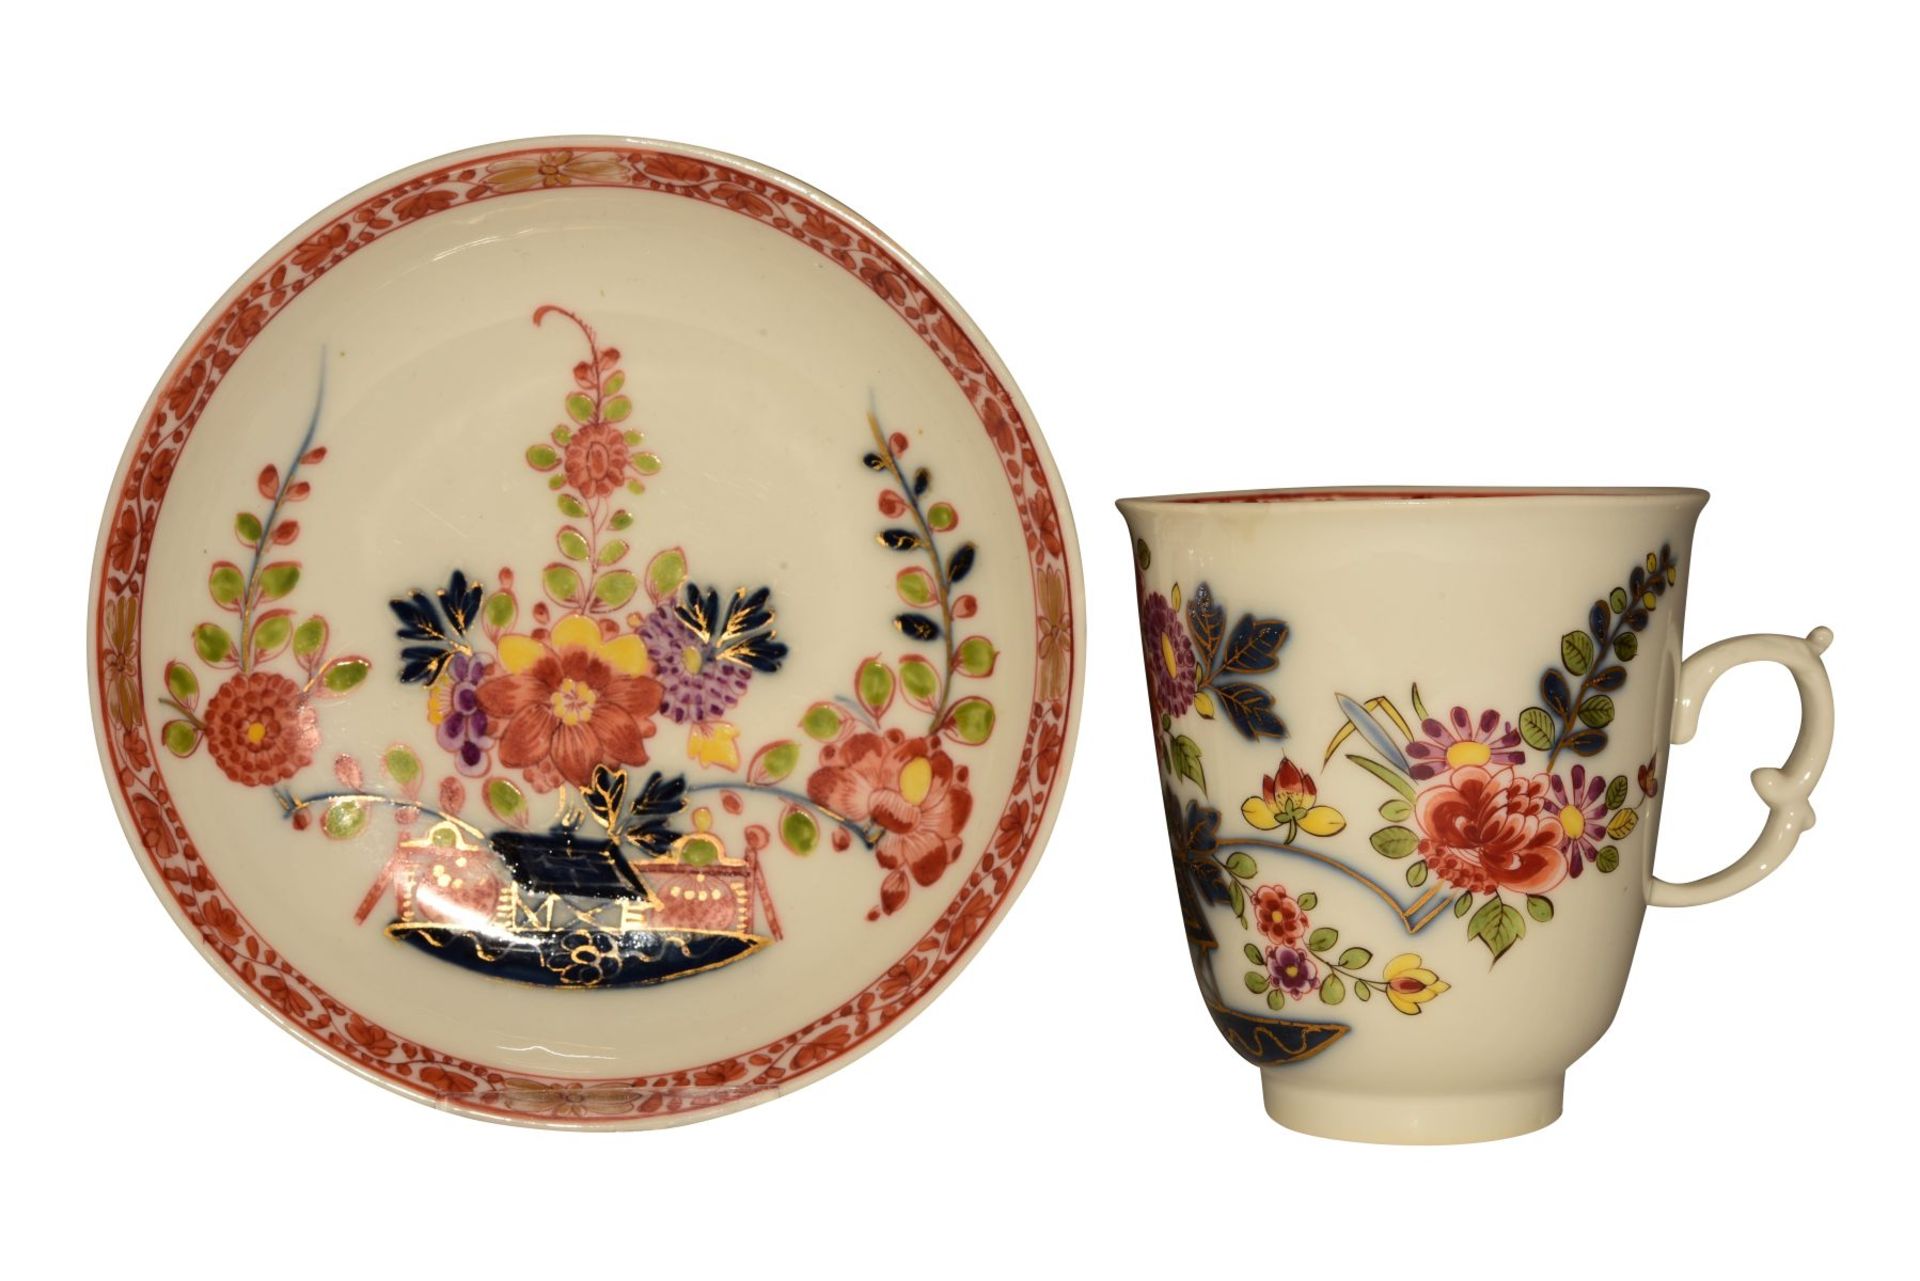 Tall cup and saucer, Meissen 1740 - Image 2 of 4